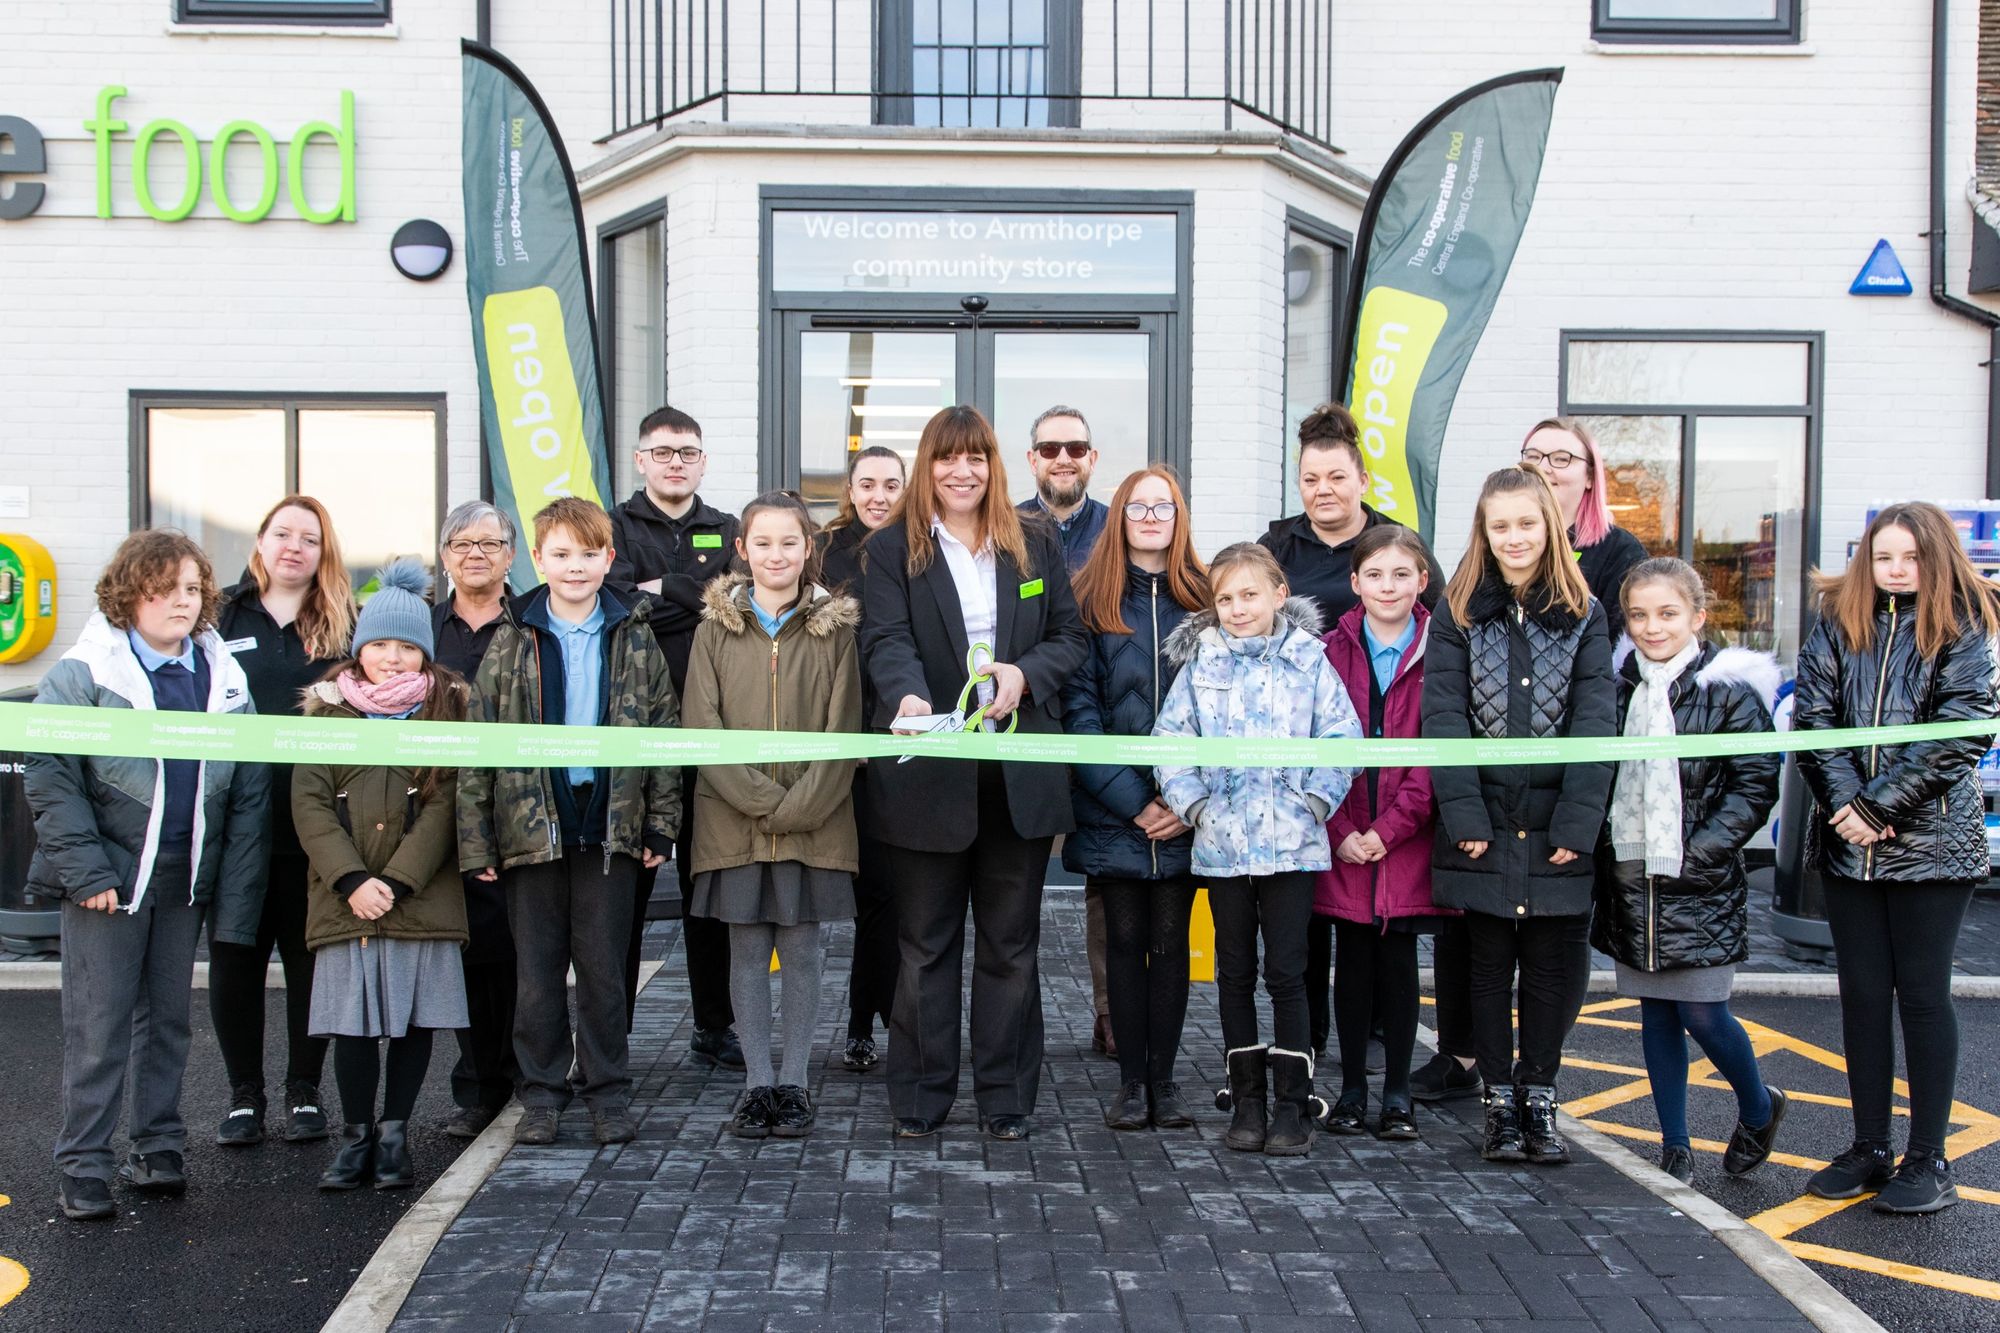 Central England Co-op officially opens its new £700,000 store in Yorkshire creating 14 new jobs